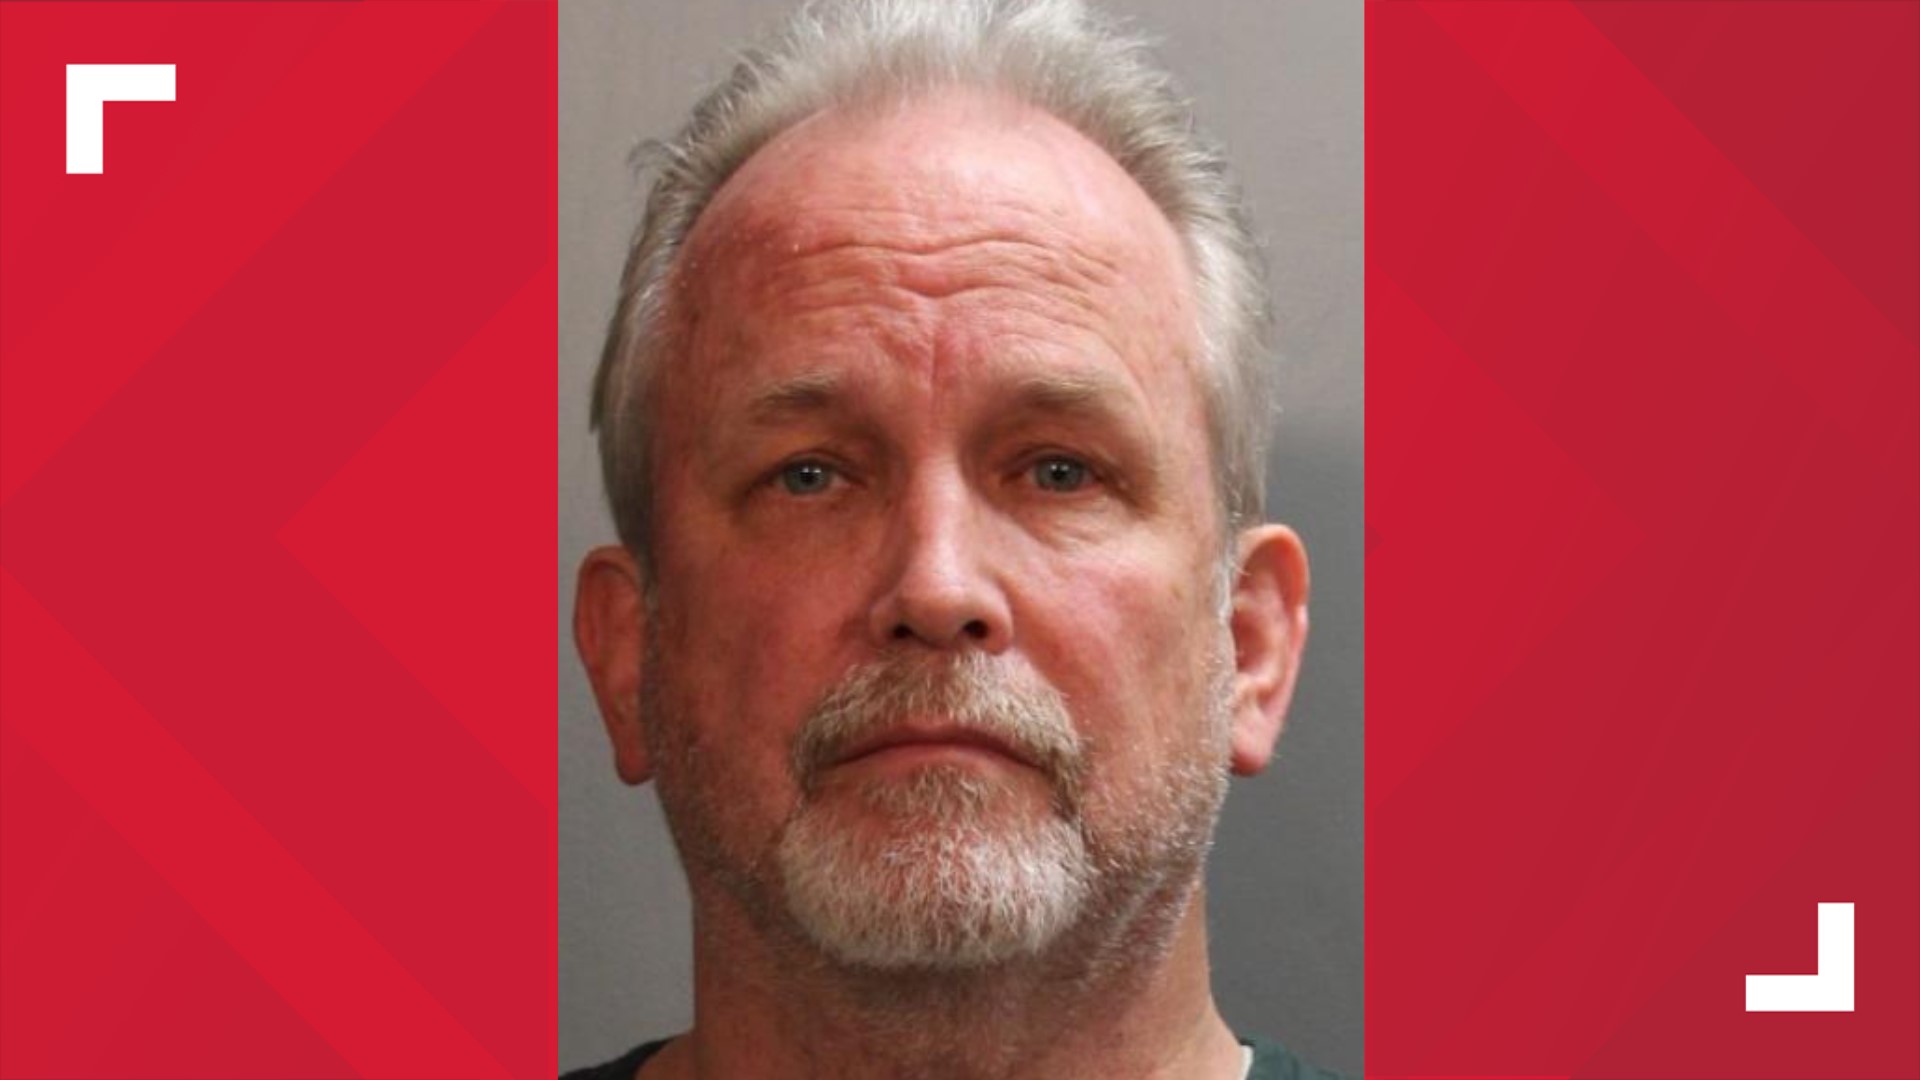 Jeffrey Clayton was arrested on charges of lewd and lascivious conduct involving a student, the school's principal said in a statement sent to students' families.